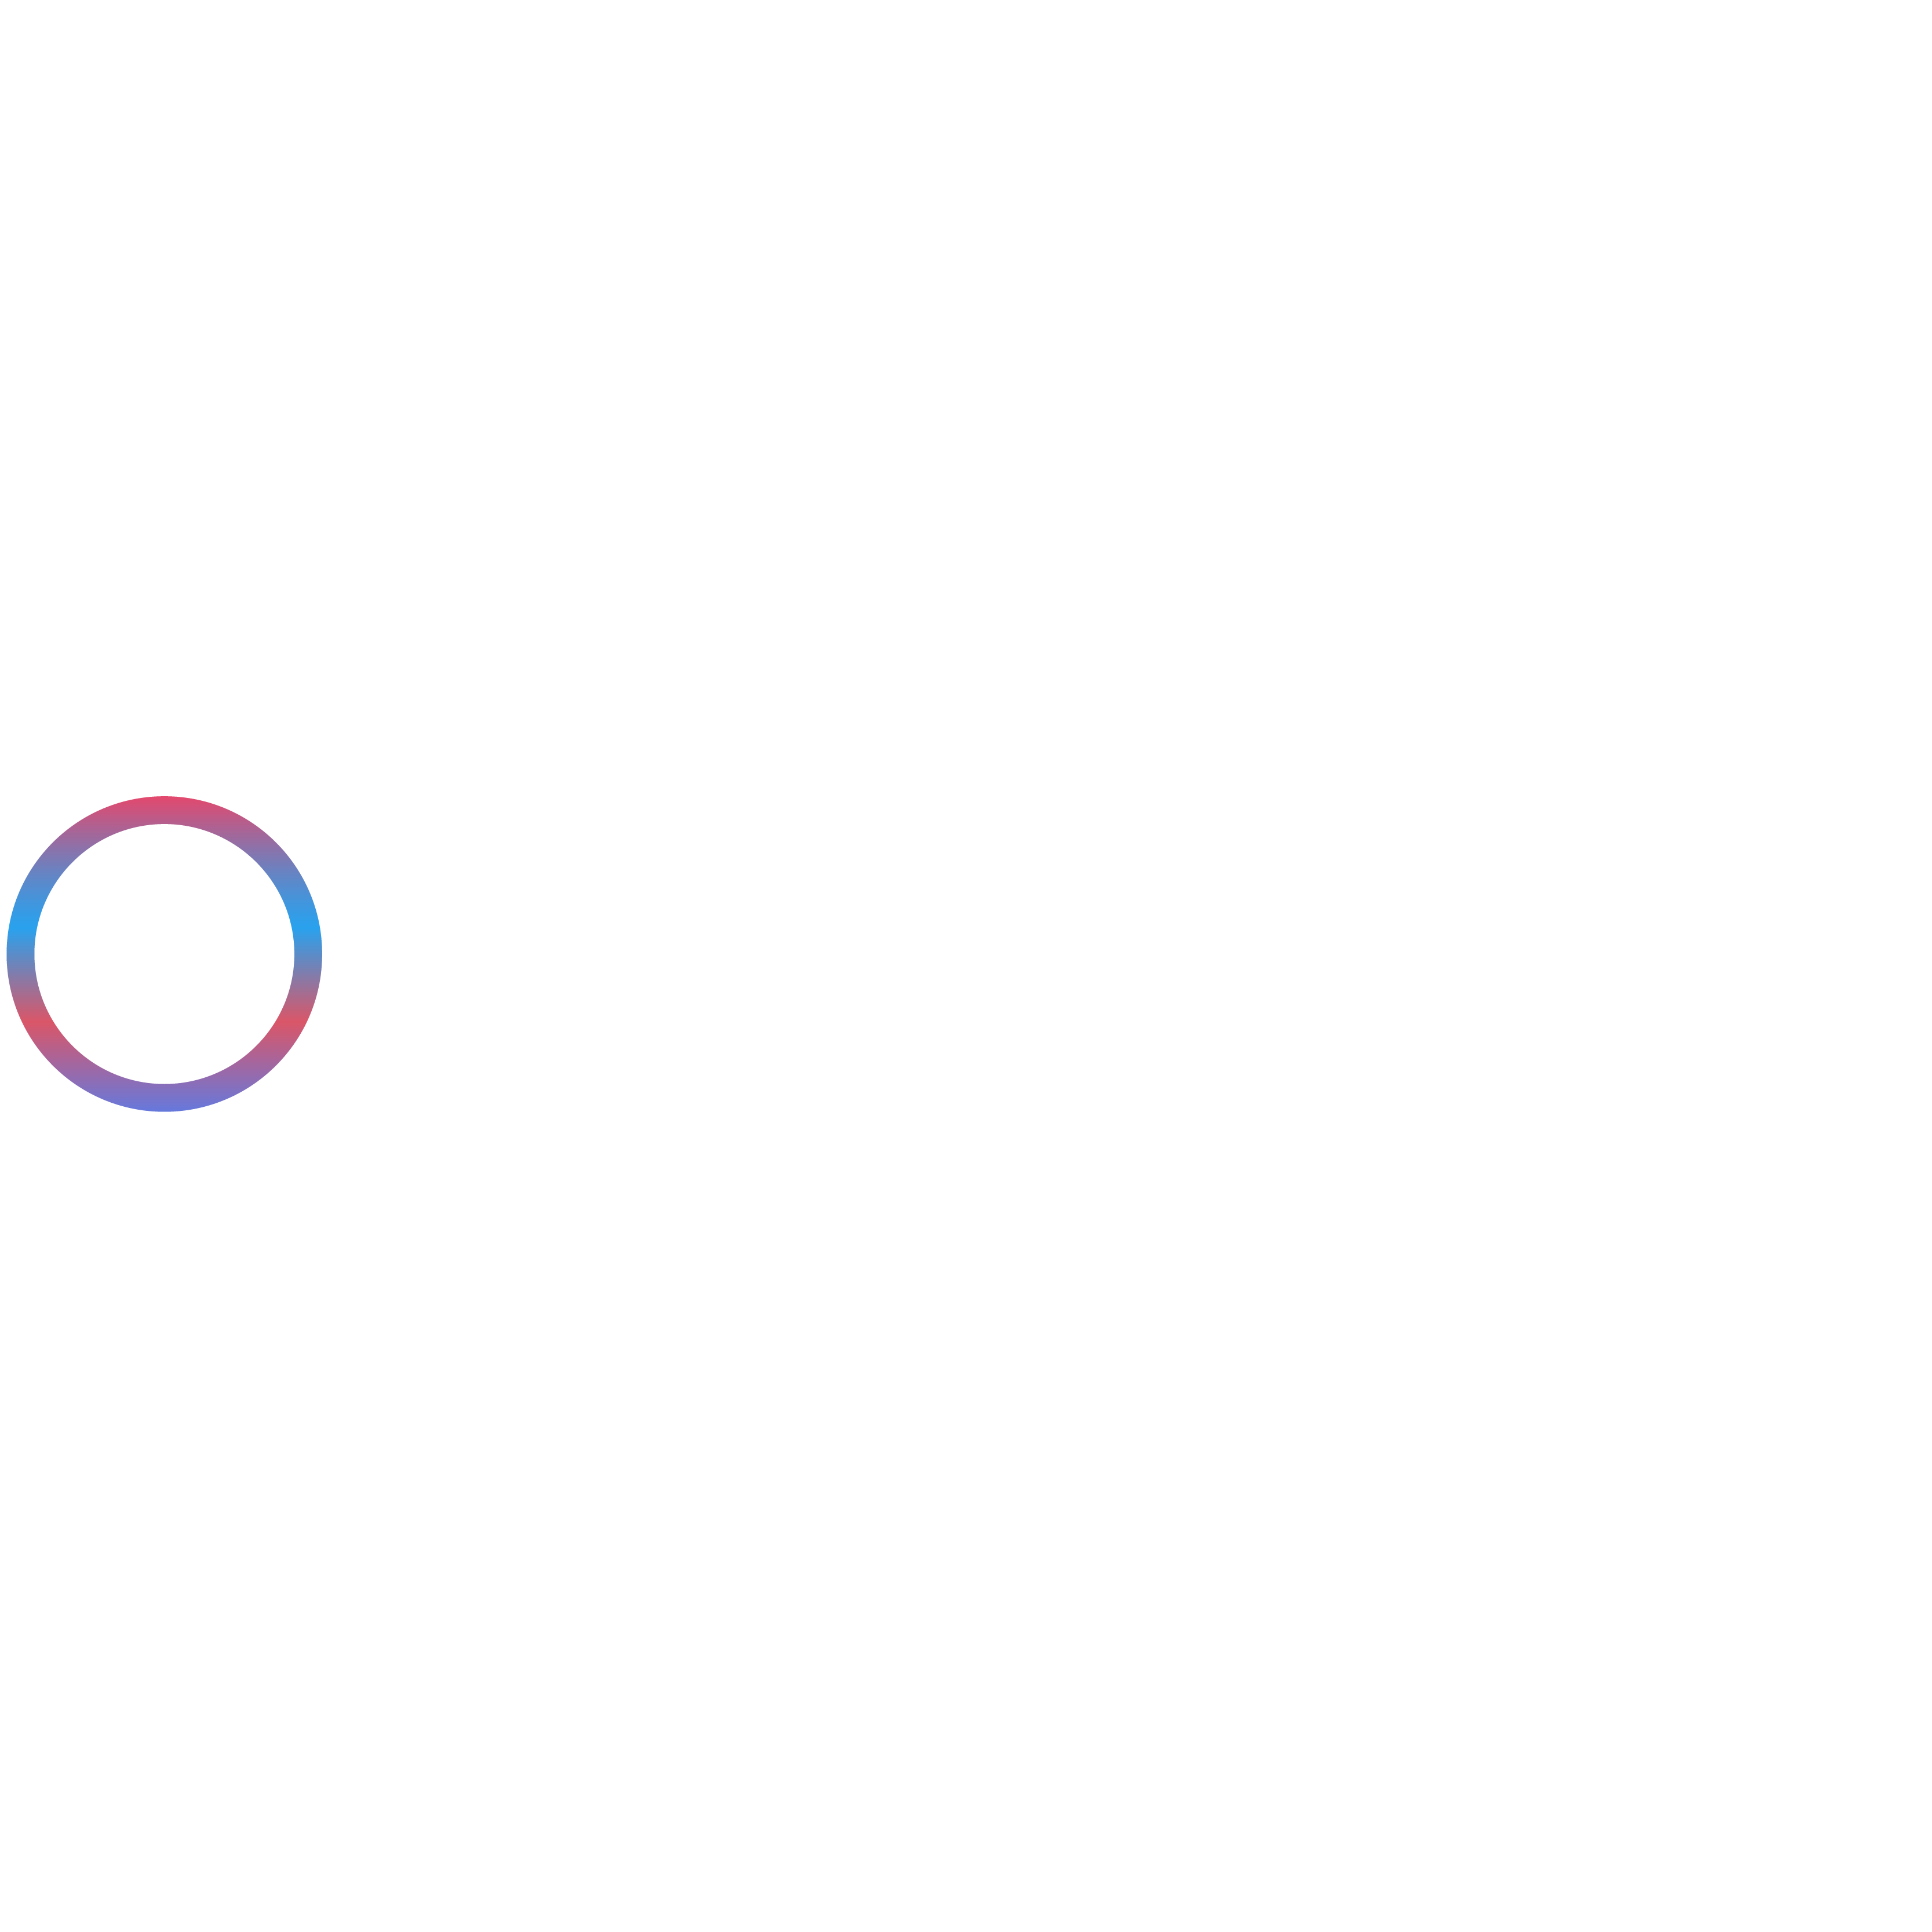 Low Cost Websites and Stores